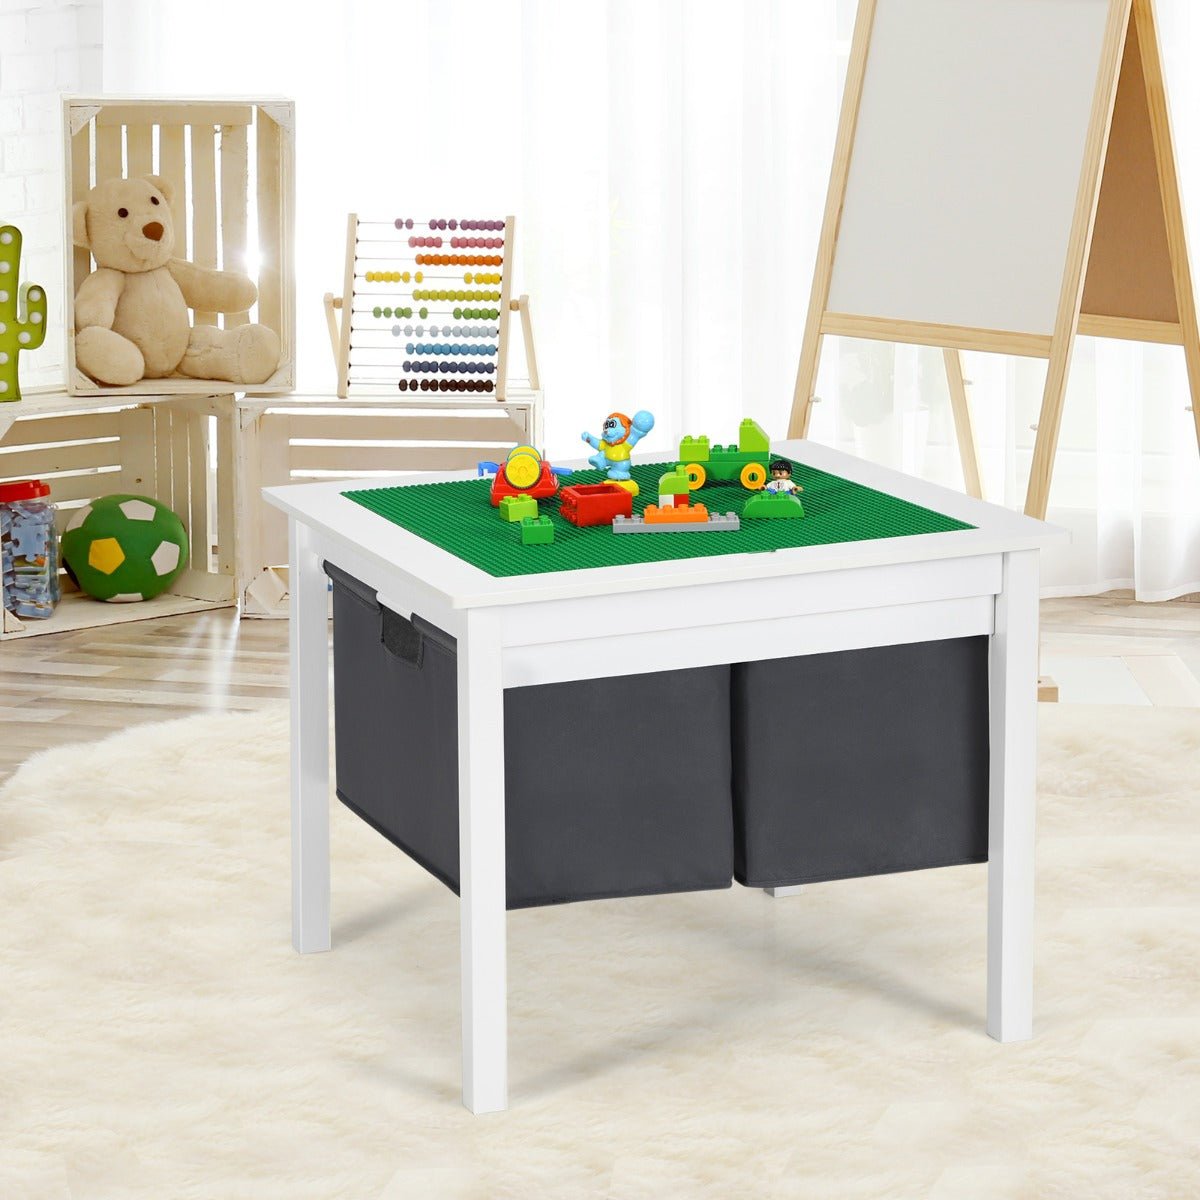 Buy the Ultimate White Kids Activity Table for Creative Playtime